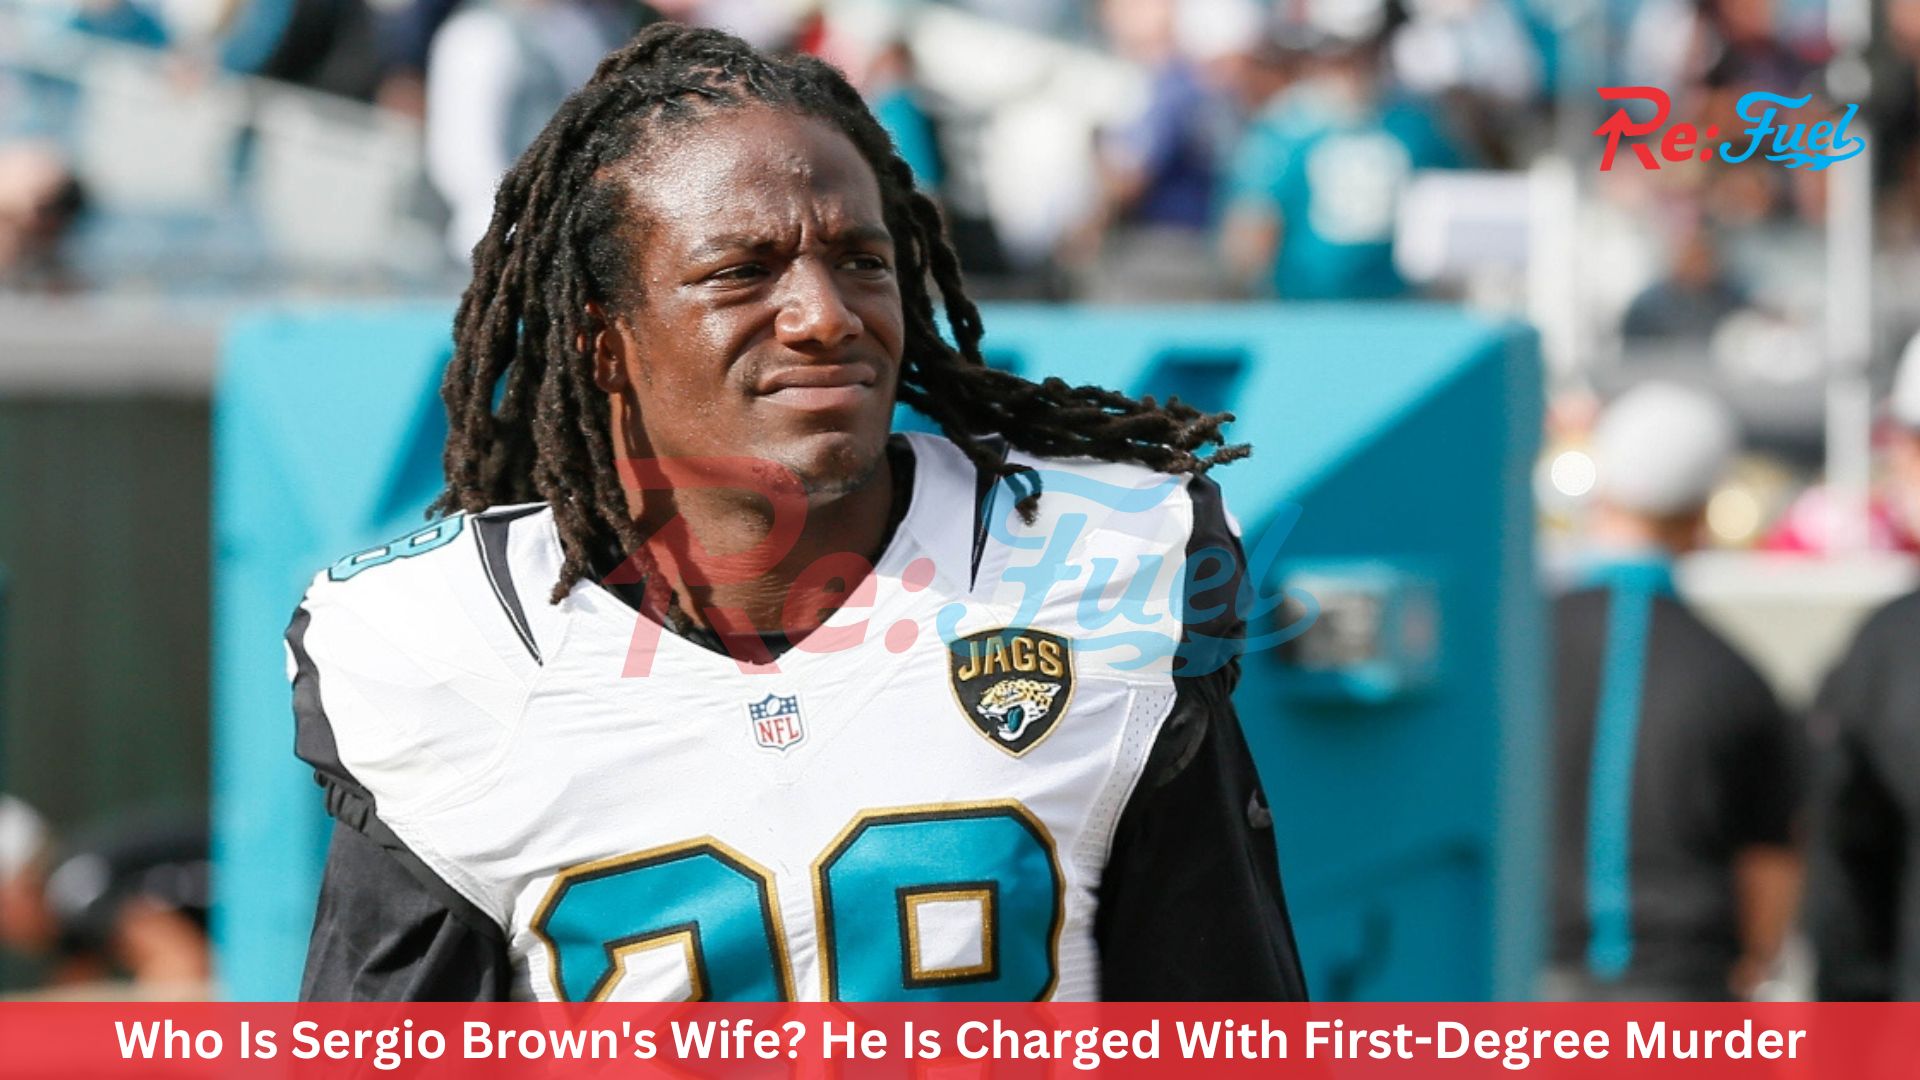 Who Is Sergio Brown's Wife? He Is Charged With First-Degree Murder